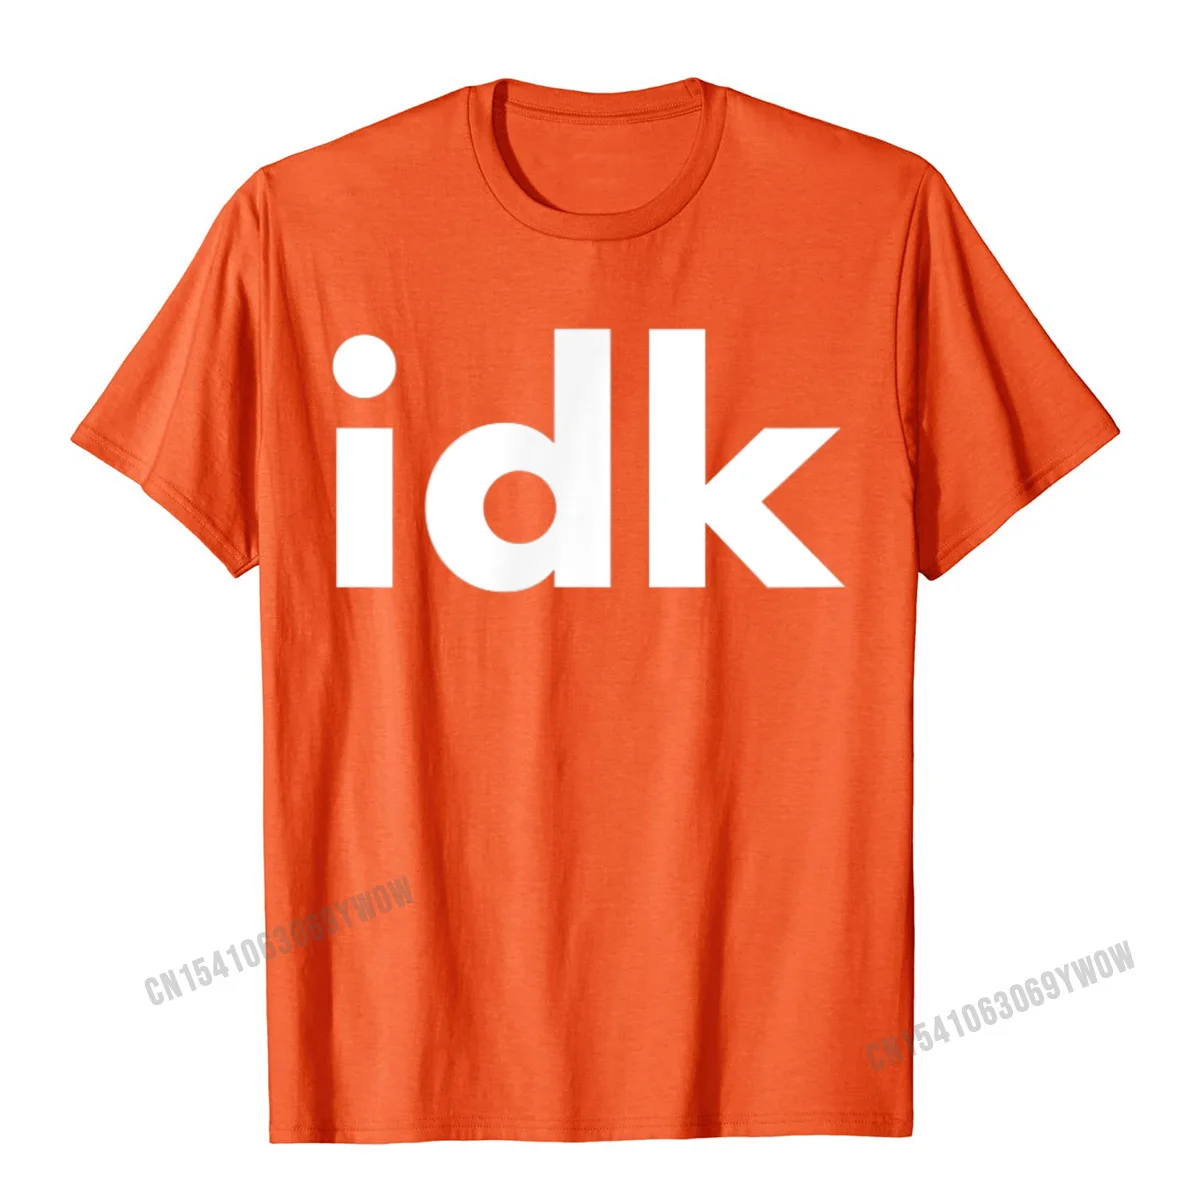 Printed On Top T-shirts Short Sleeve Leisure Prevailing Men Thanksgiving Day Tees Leisure Sweatshirts Round Neck Pure Cotton IDK I Dont Know T-shirt Type Font__968 orange